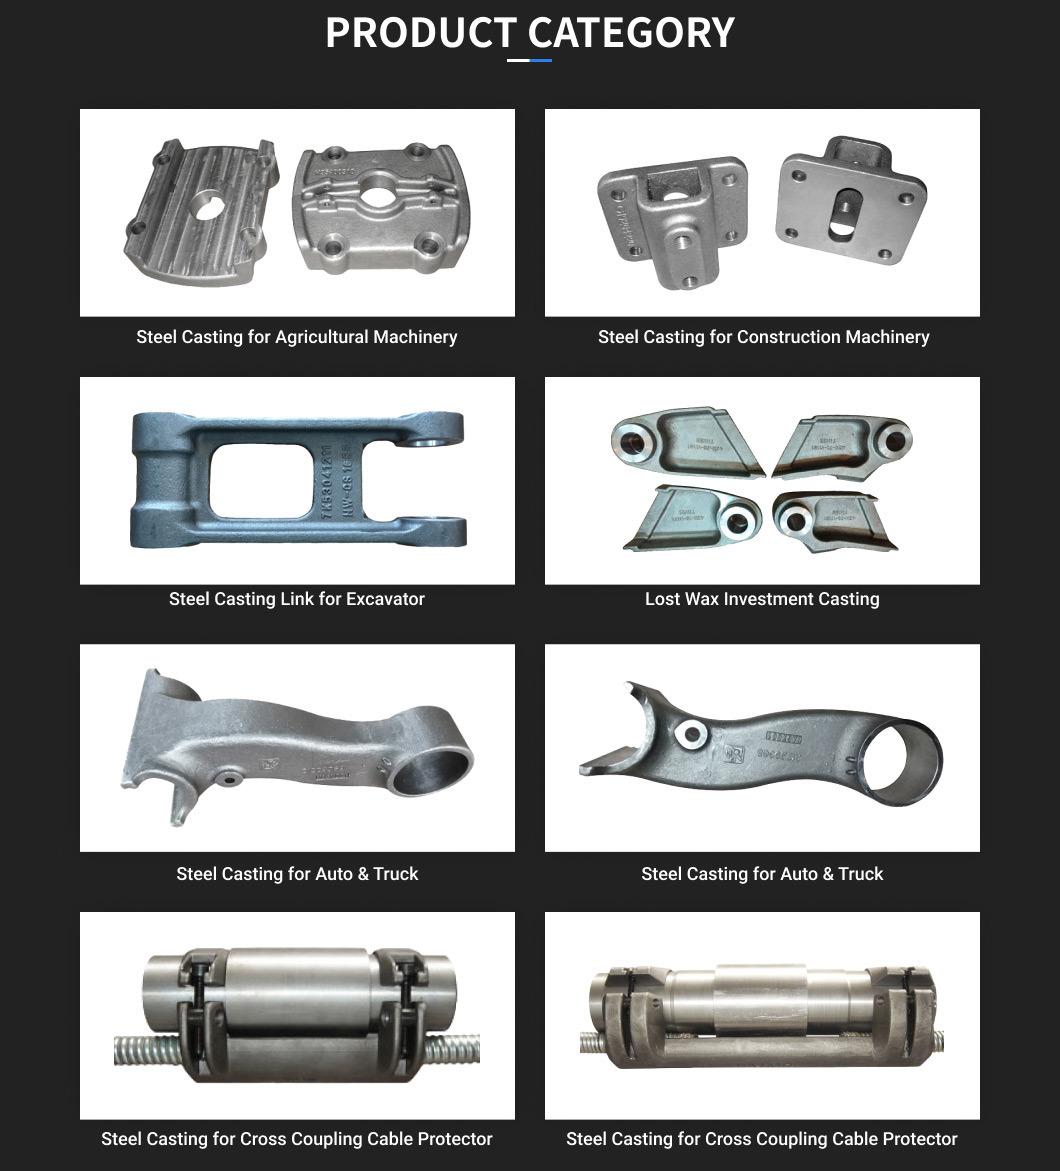 Low Price Smooth Surface Top Technology Brand Metal Casting